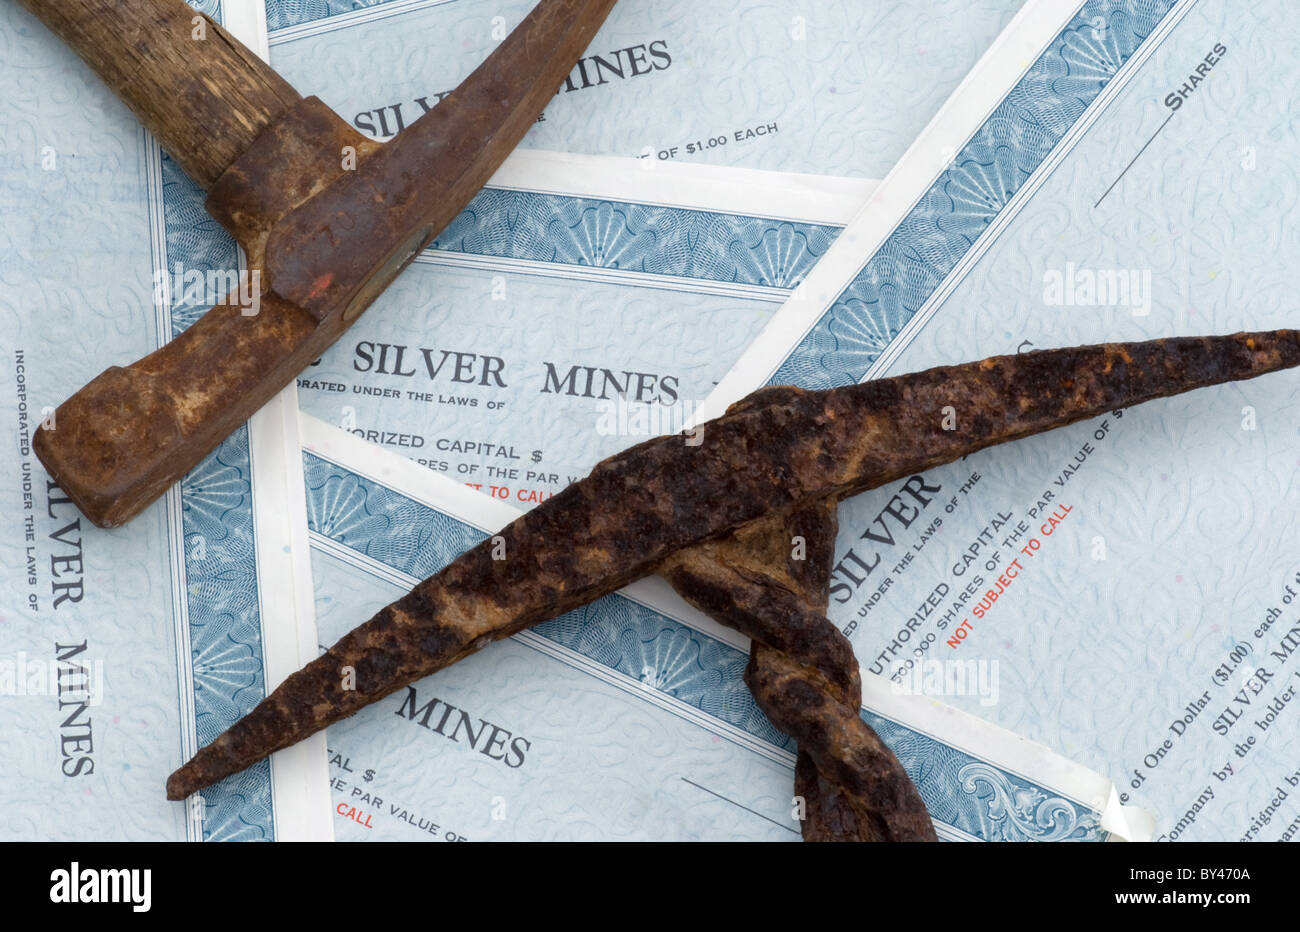 Two old mining picks resting on silver mine stock certificates. Stock Photo